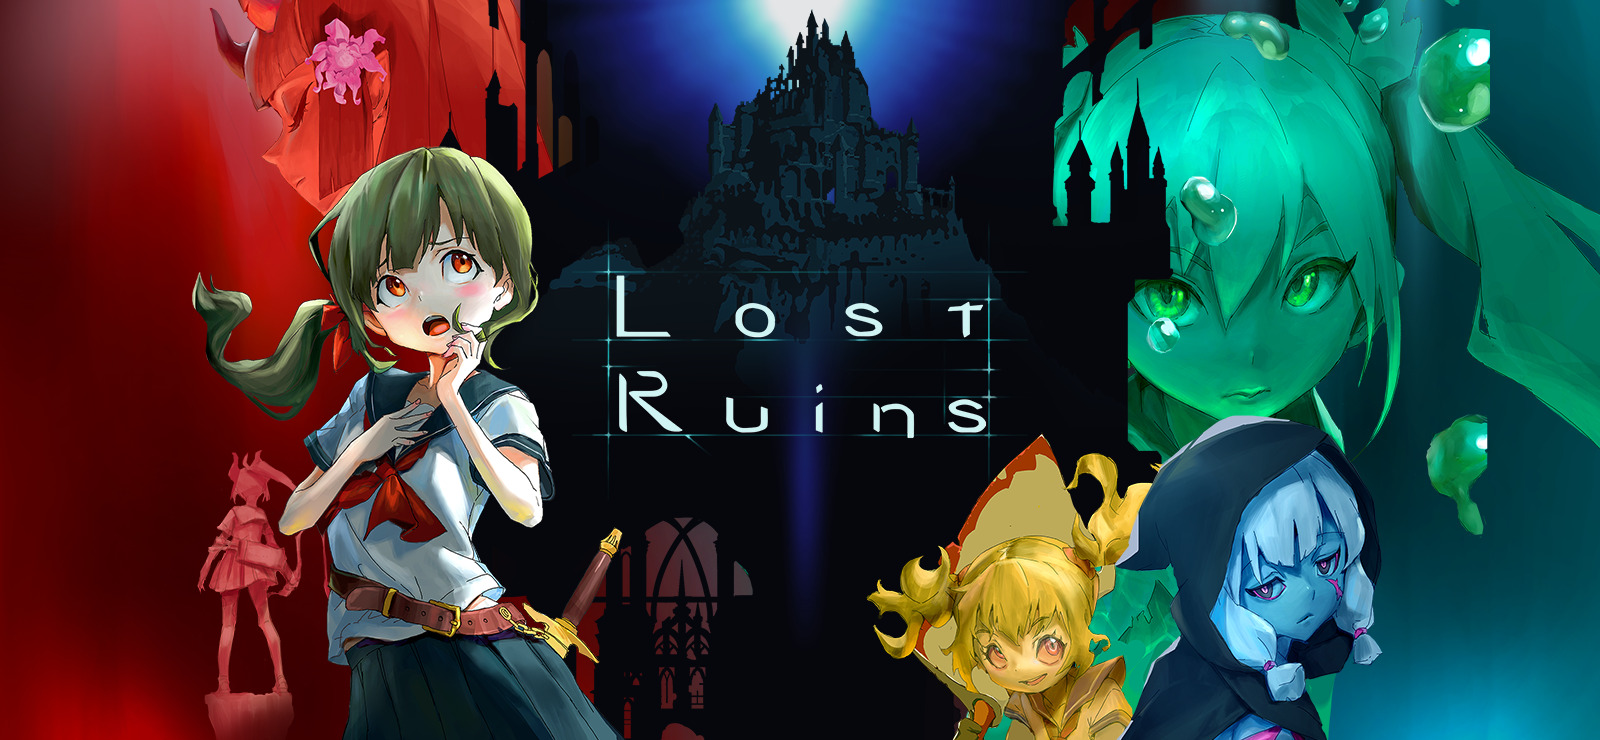 

Lost Ruins is a 2D side-scrolling survival action game, where you play as a young girl 